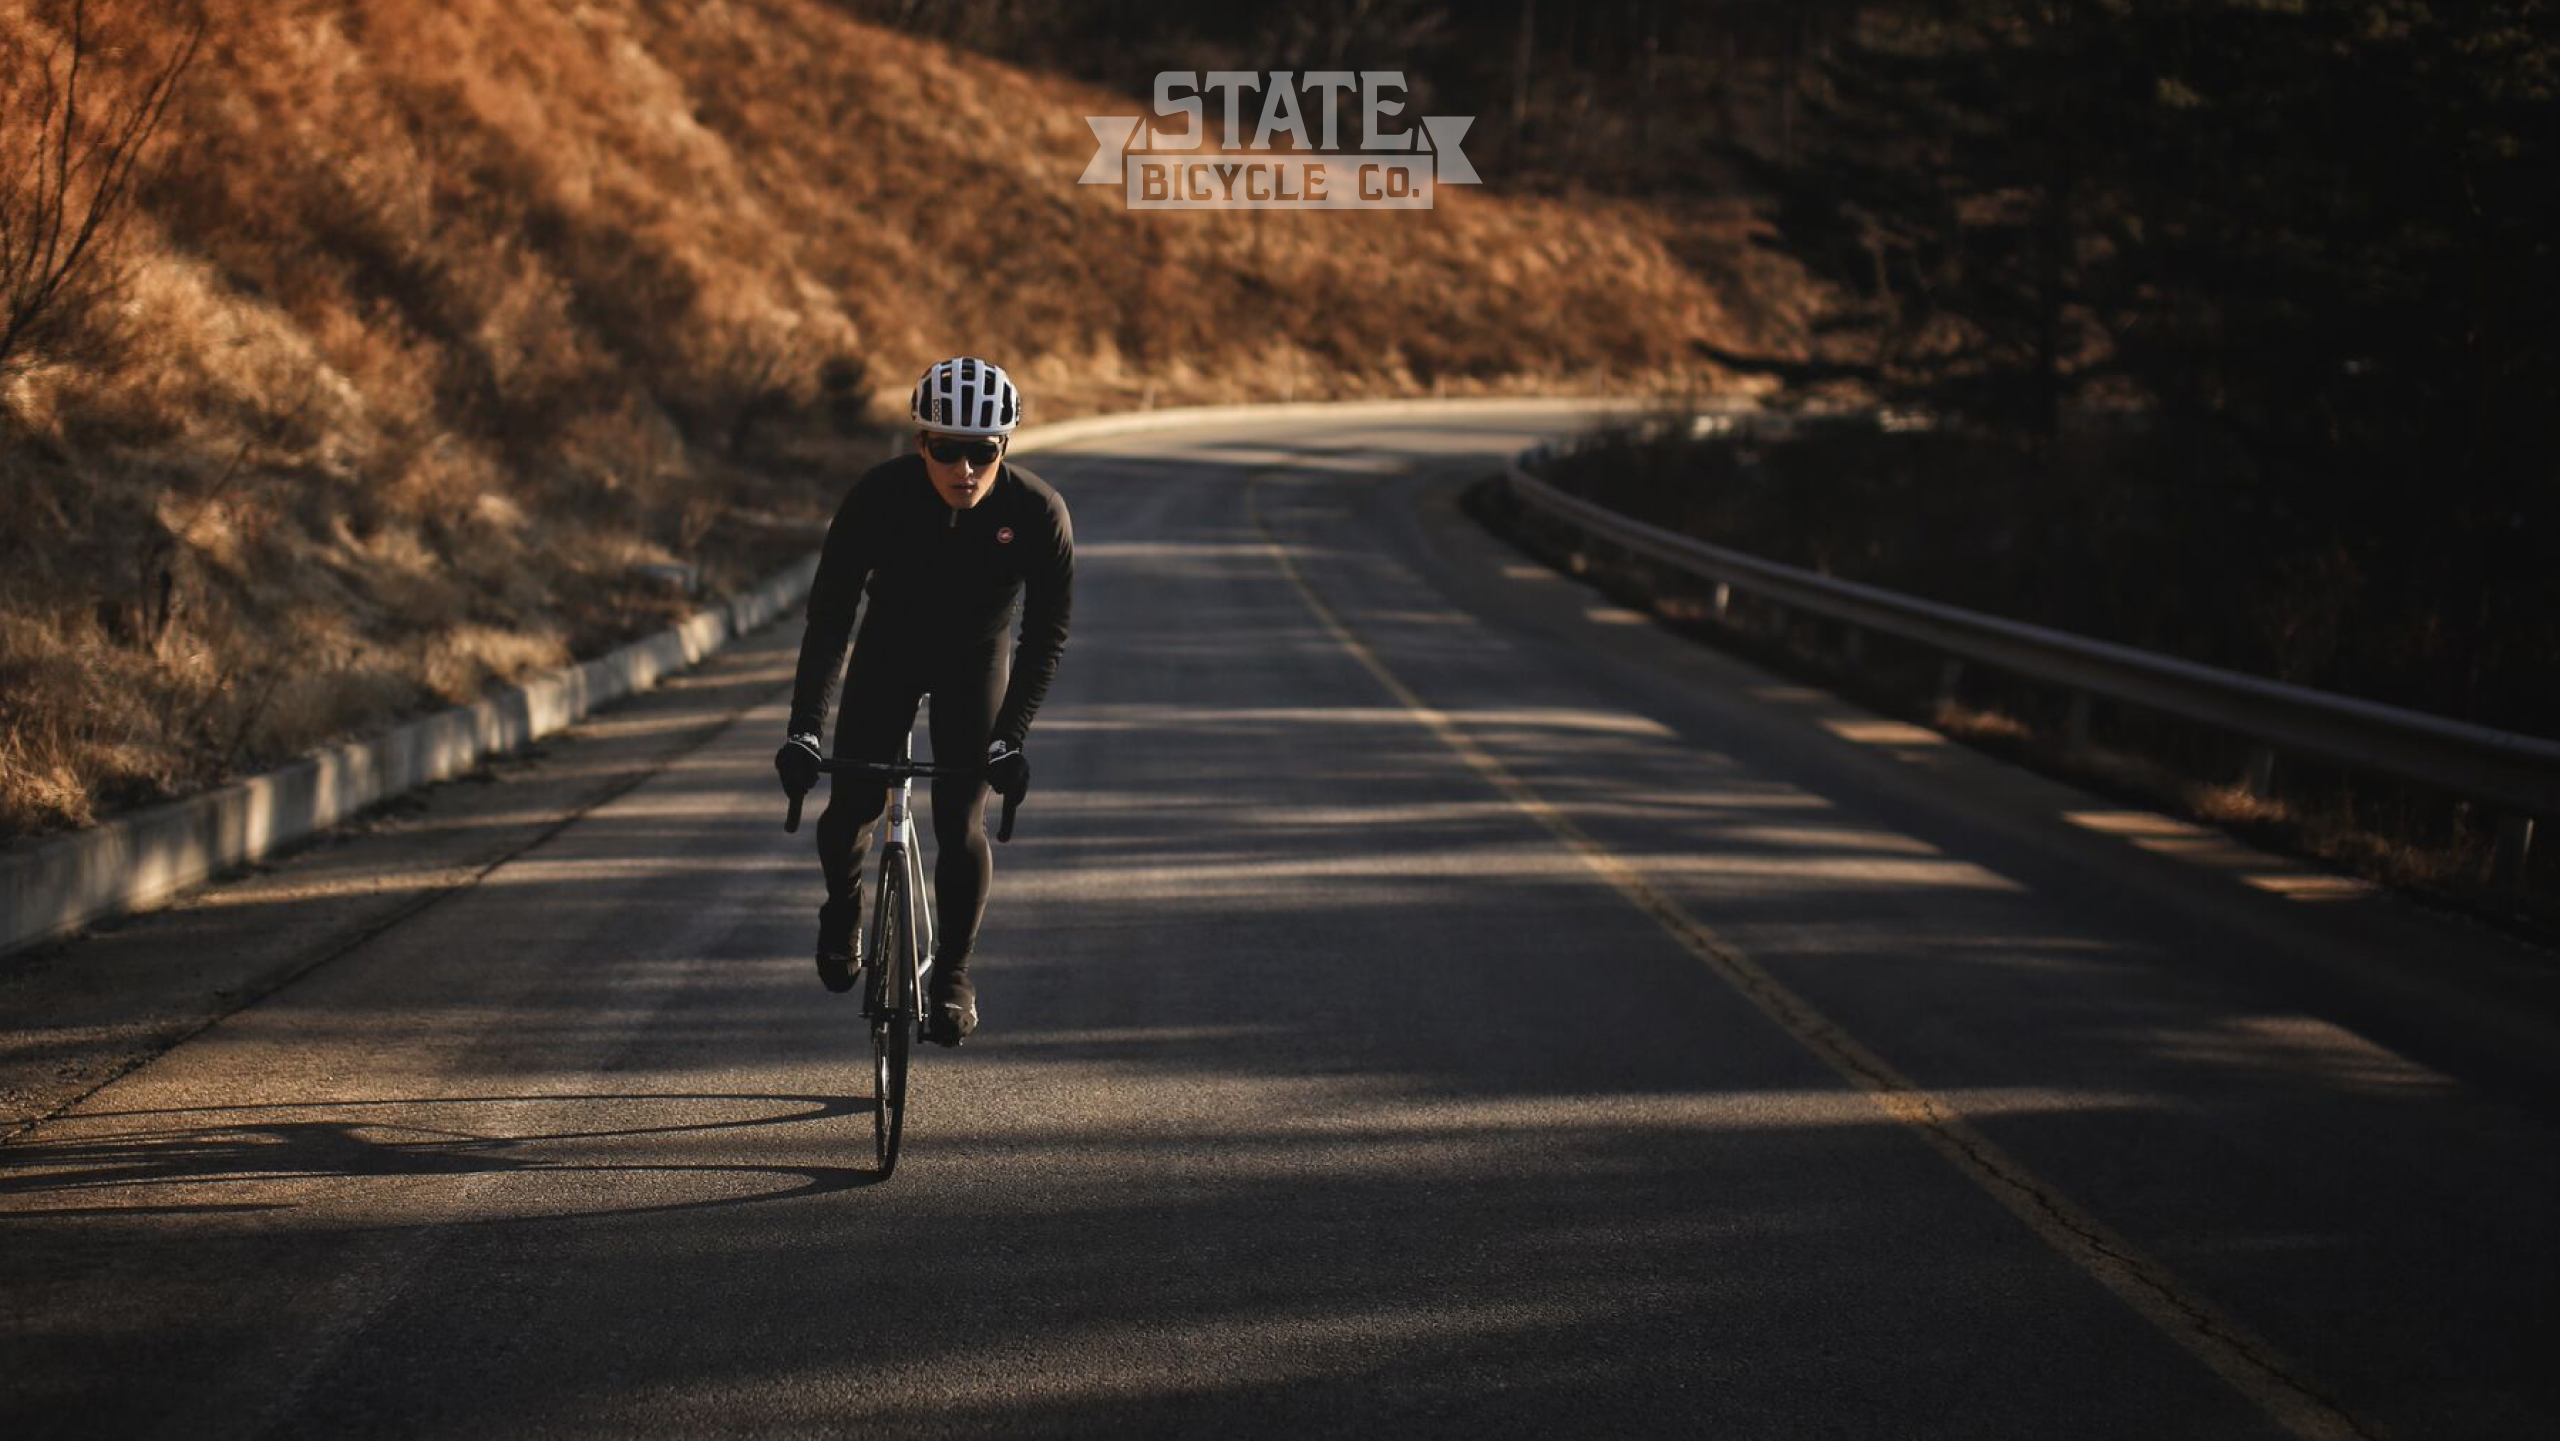 Monthly Wallpaper November 2015 State Bicycle Co